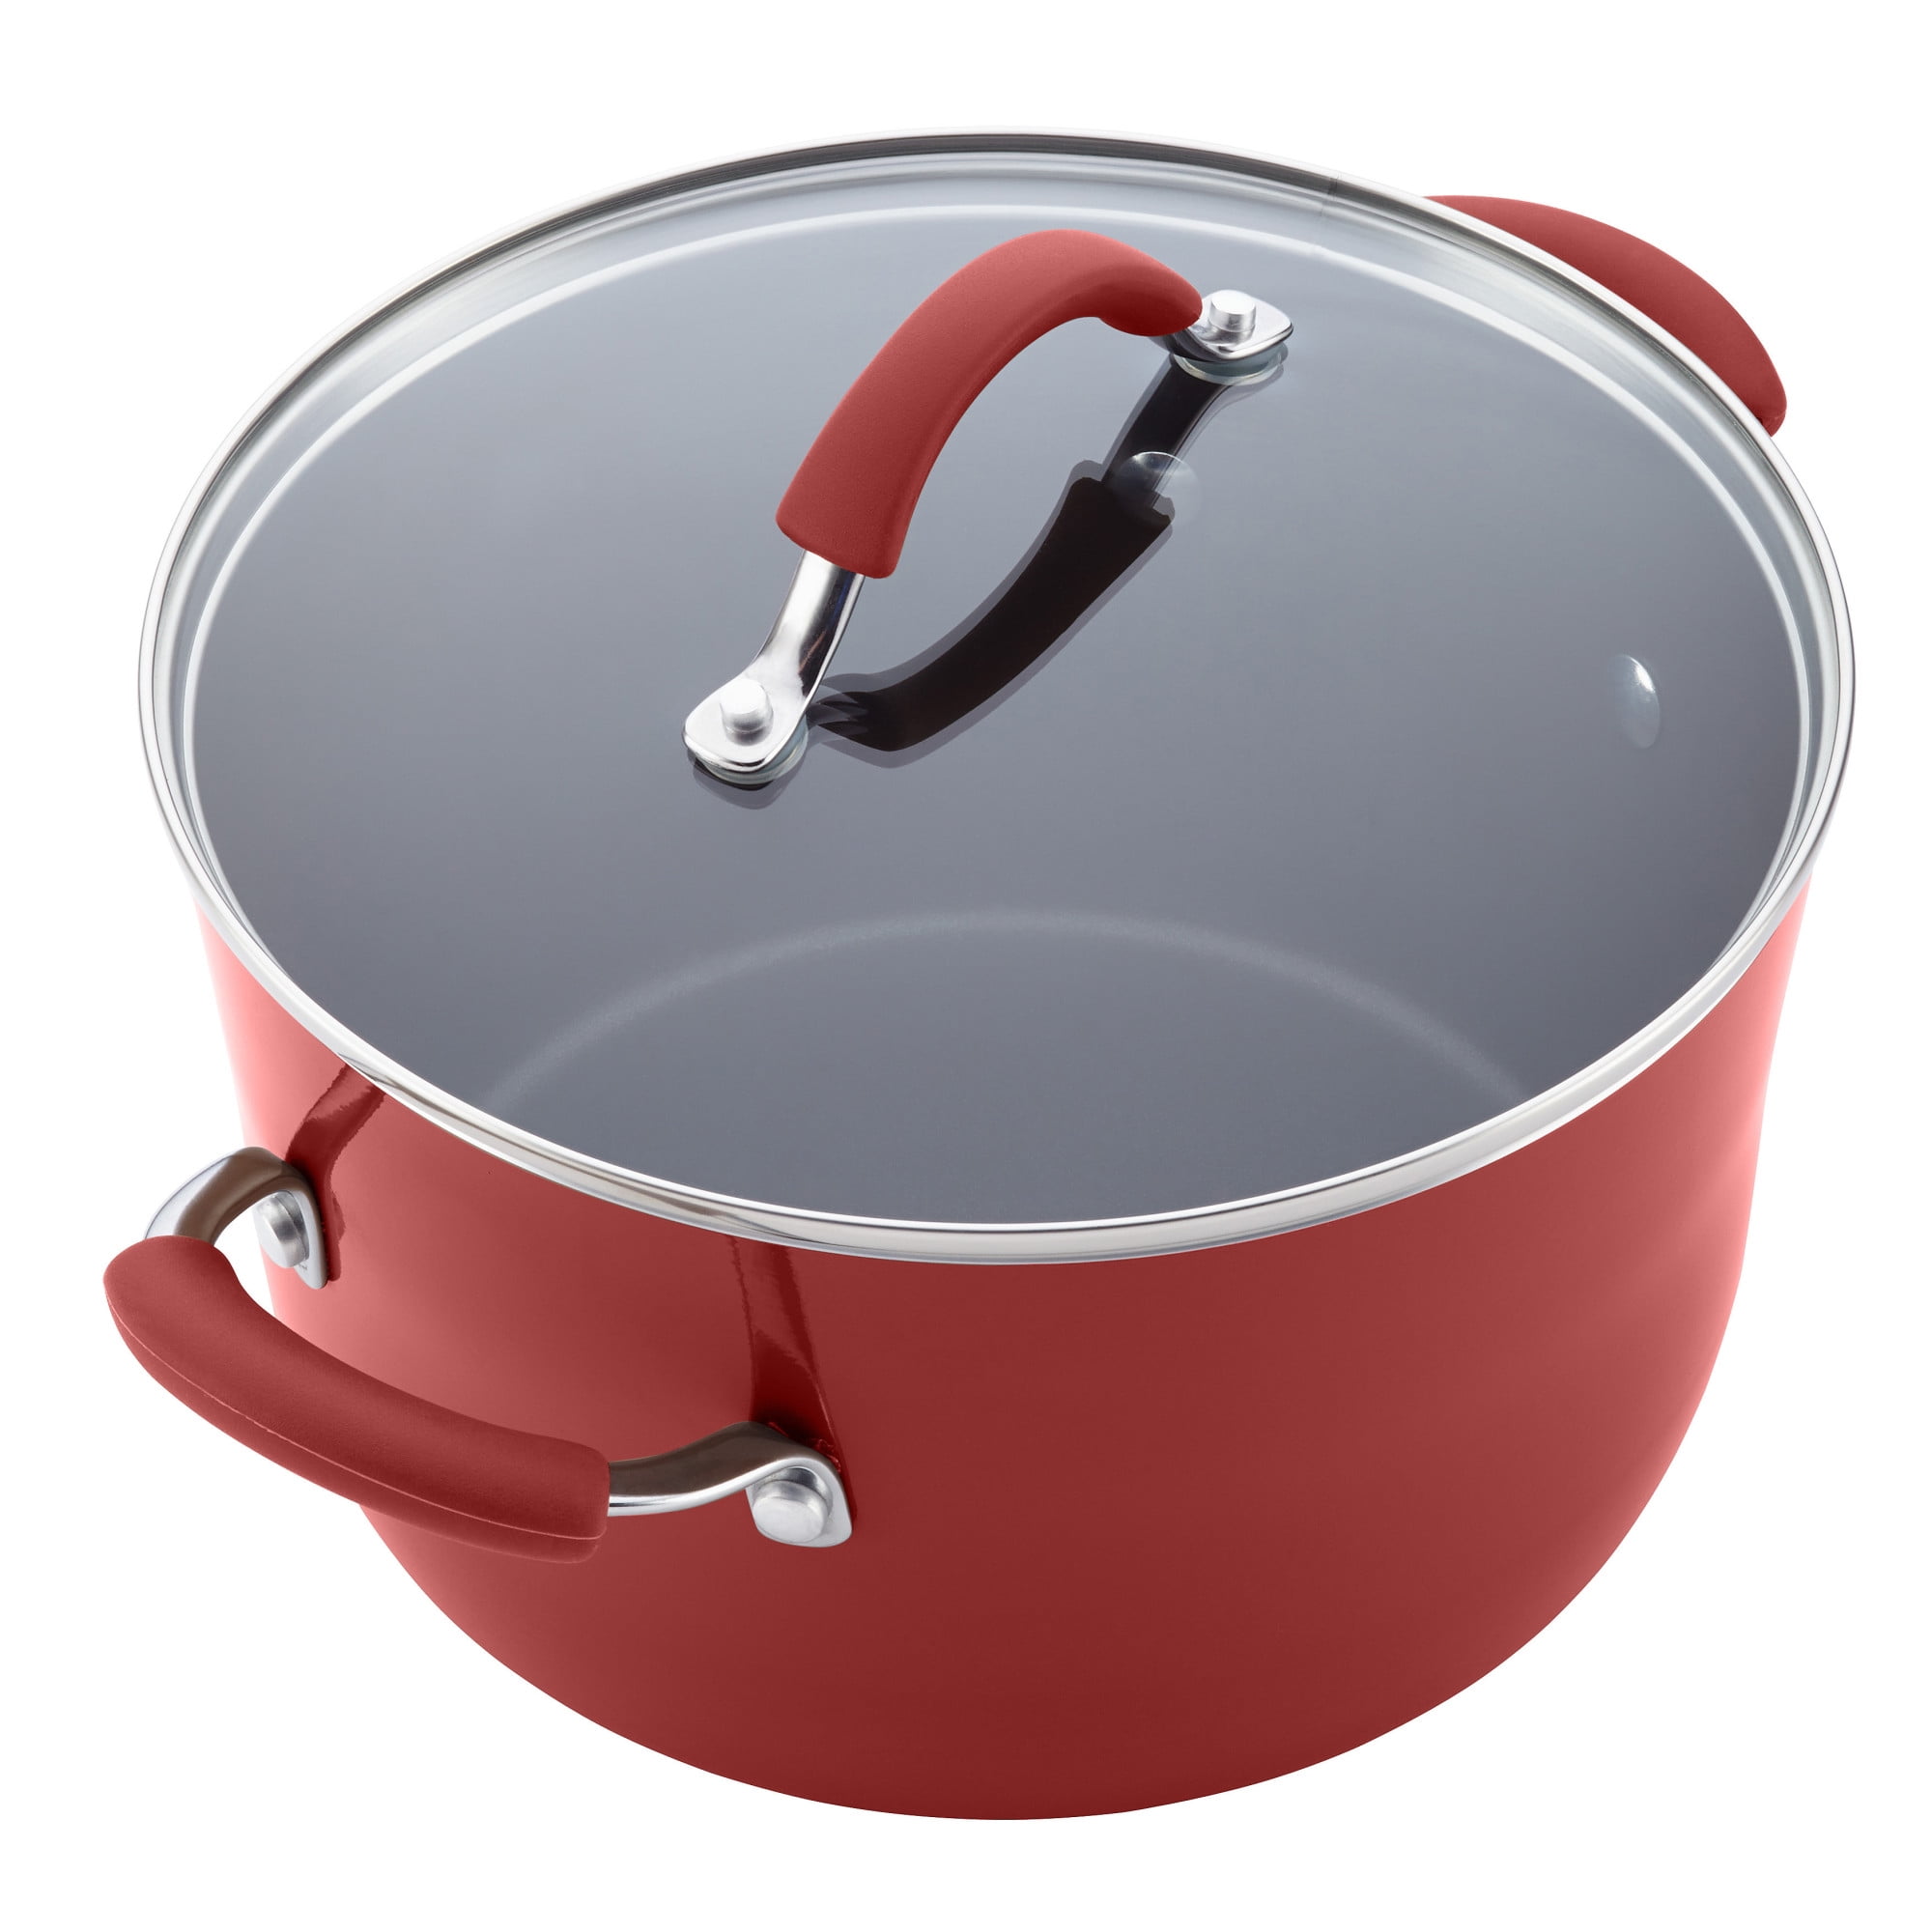 Rachael Ray™ Create Delicious Nonstick Aluminum 13-Piece Cookware Set in  Red, 13 units - Ralphs